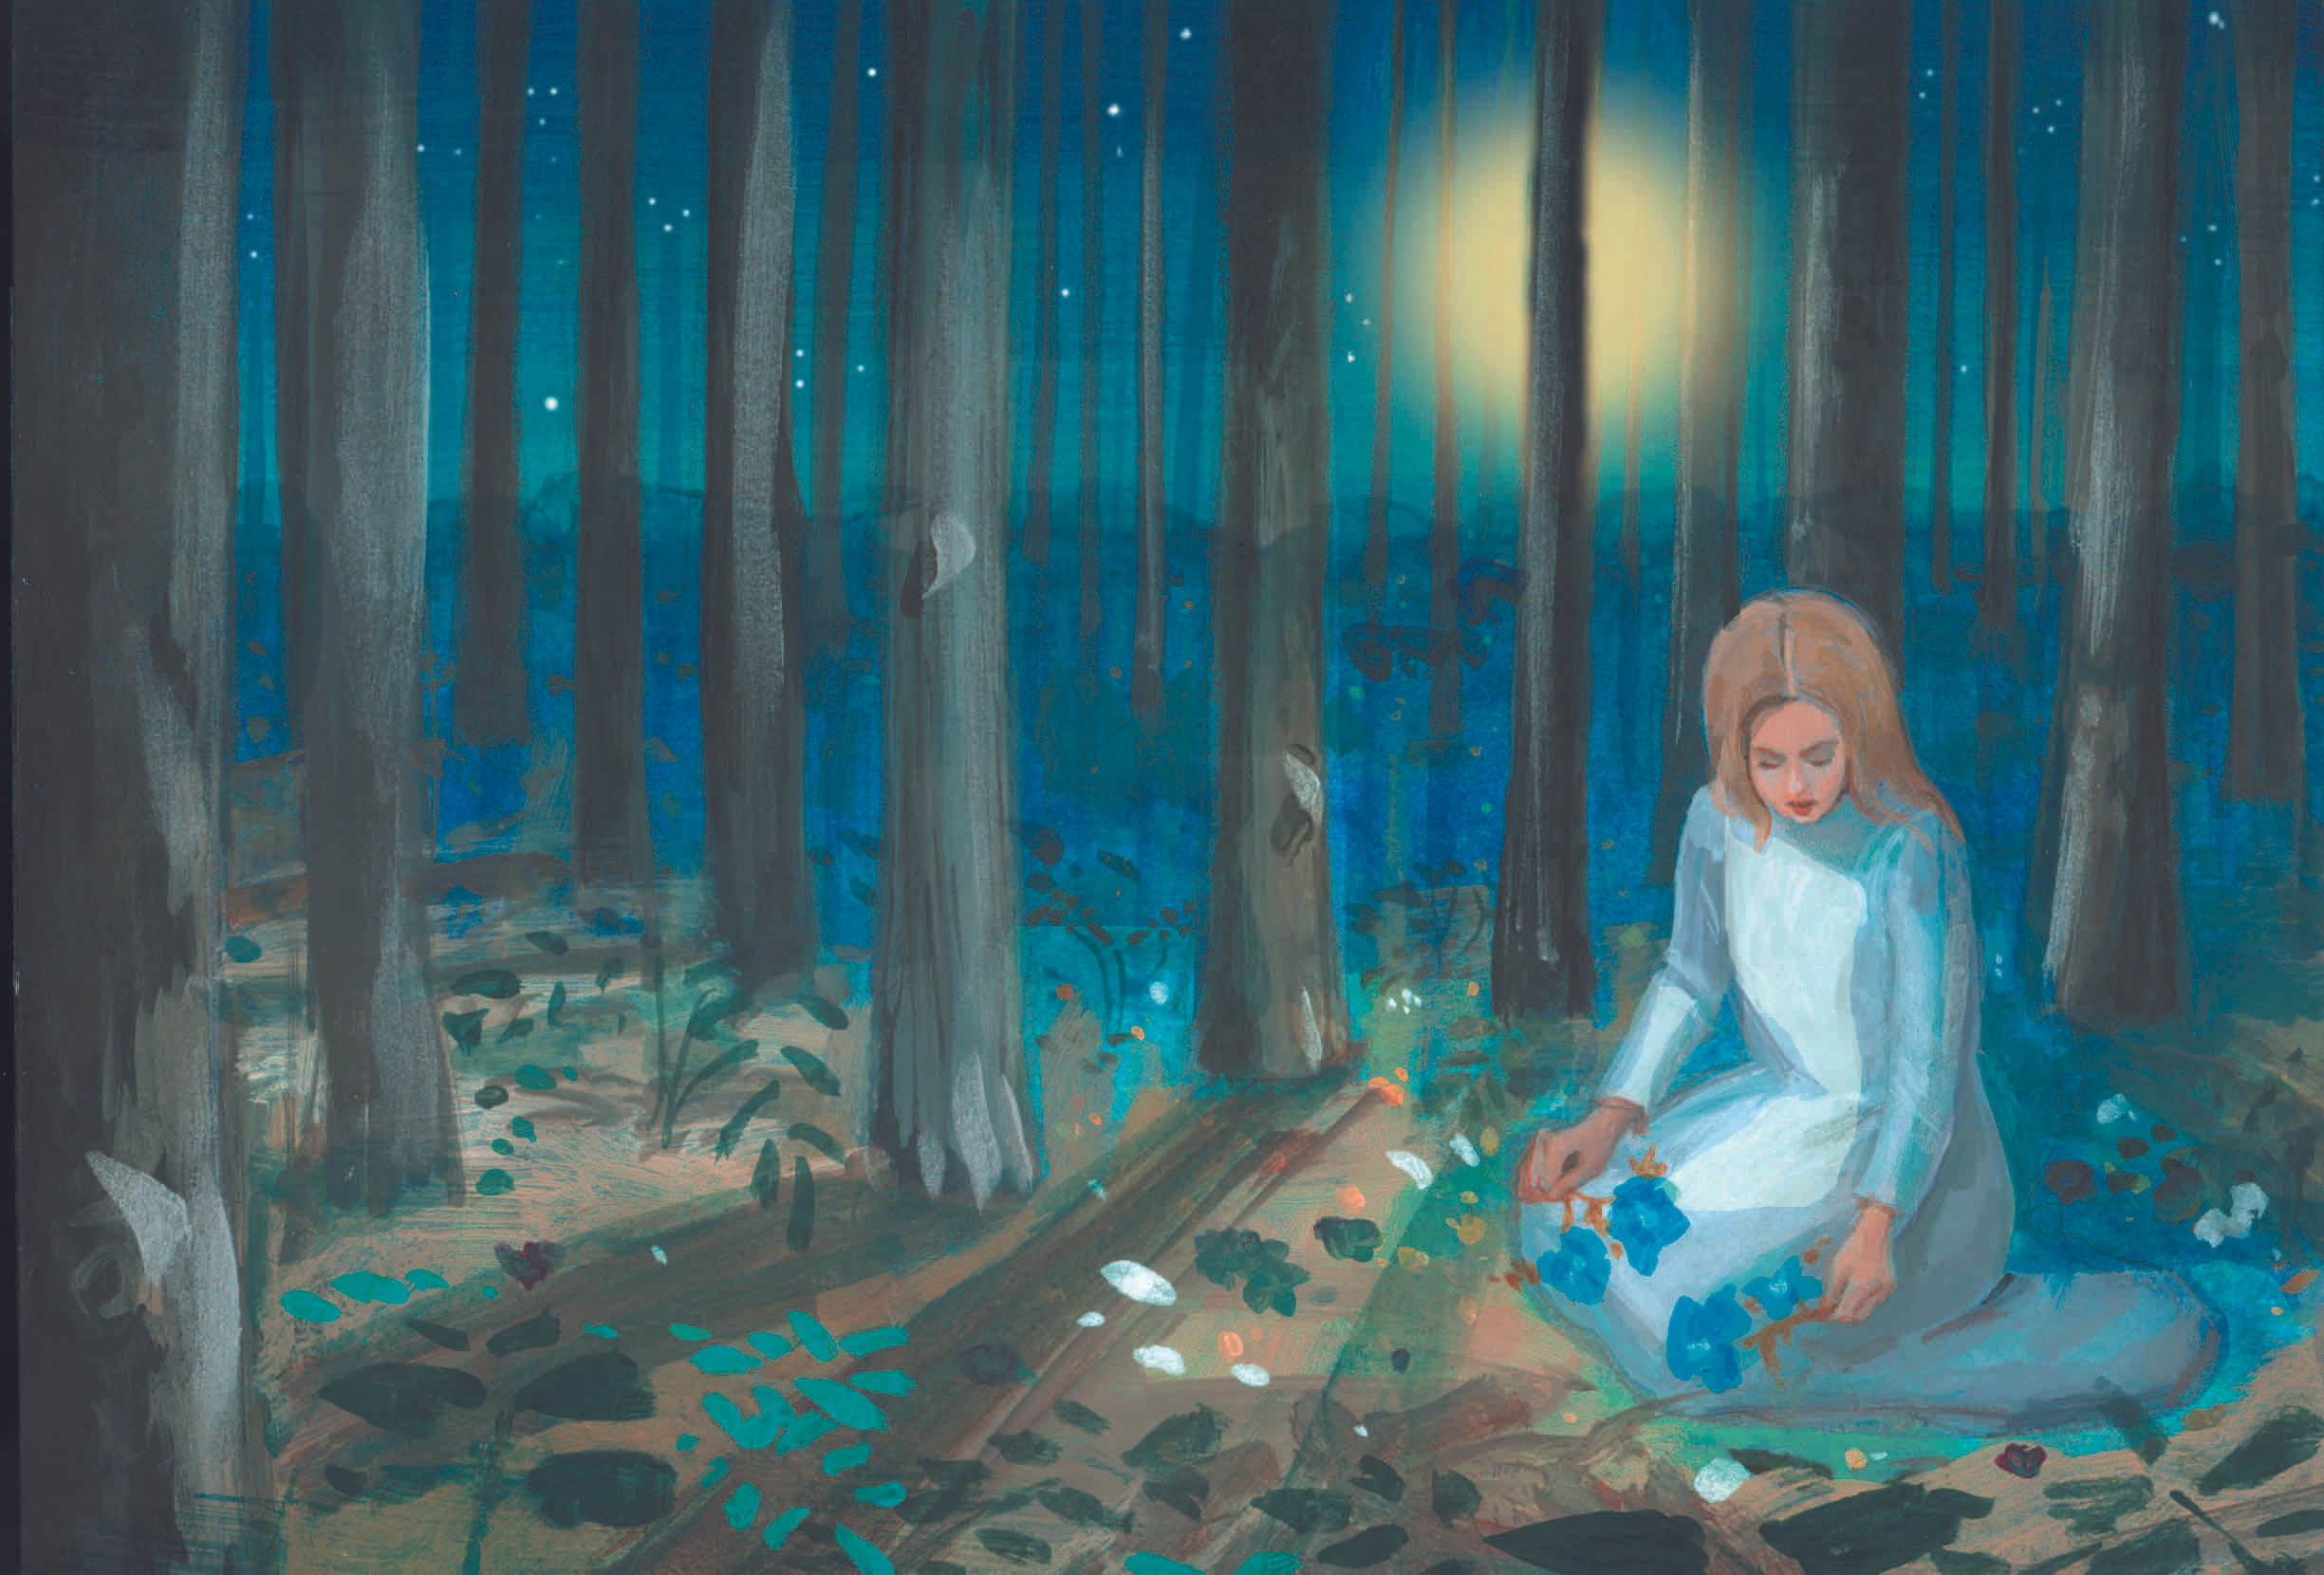 Rough painting for the film "Getting over it", starring Kirsten Dunst and Ben Foster.  A MIRAMAX film.